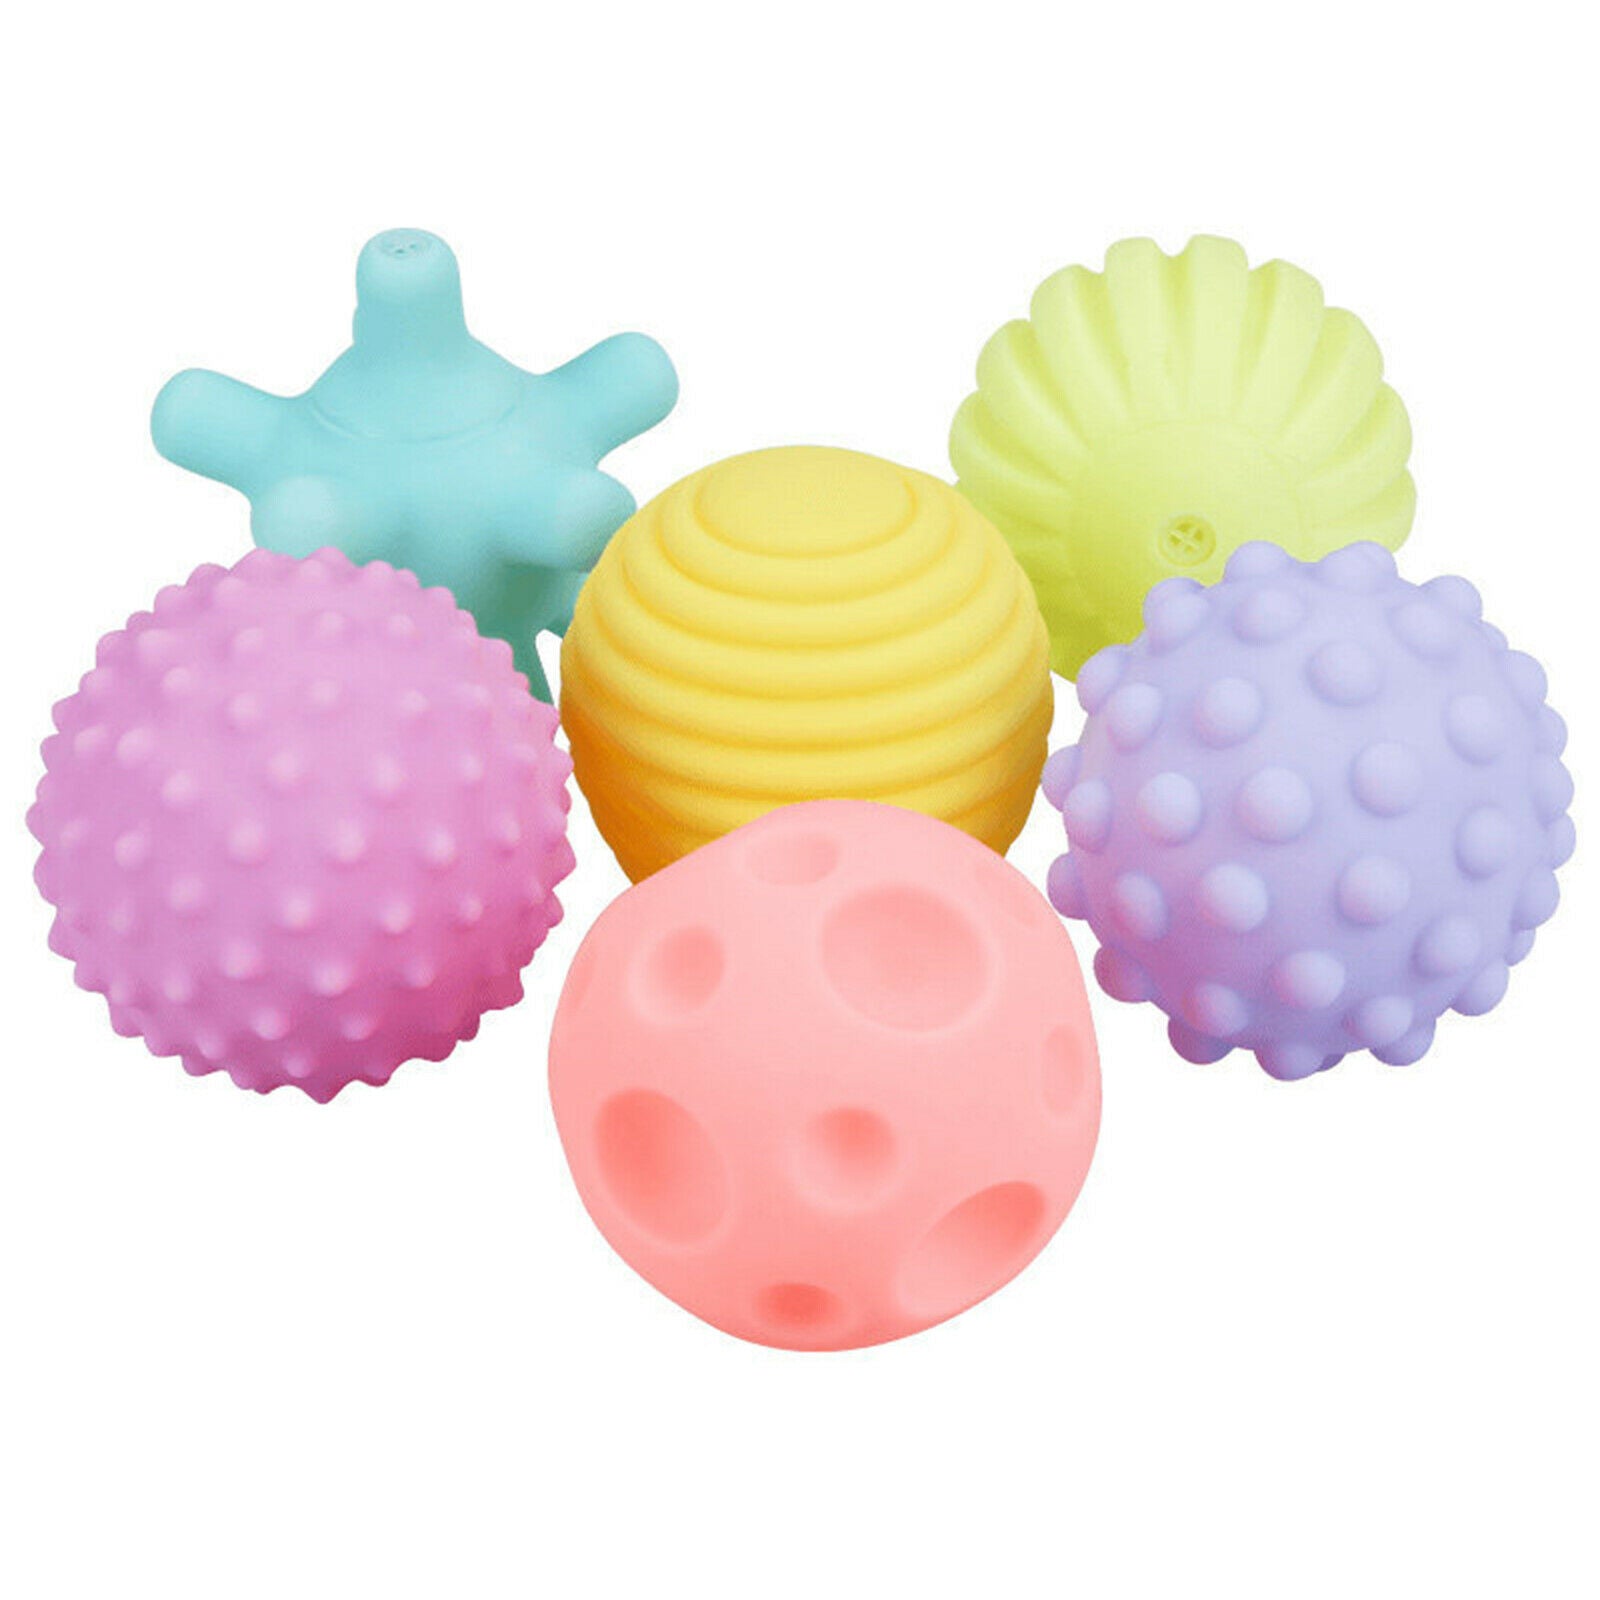 6x Soft Rubber Pet Squeaker Balls Chew Bite Teeth Cleaning Interactive Toys @